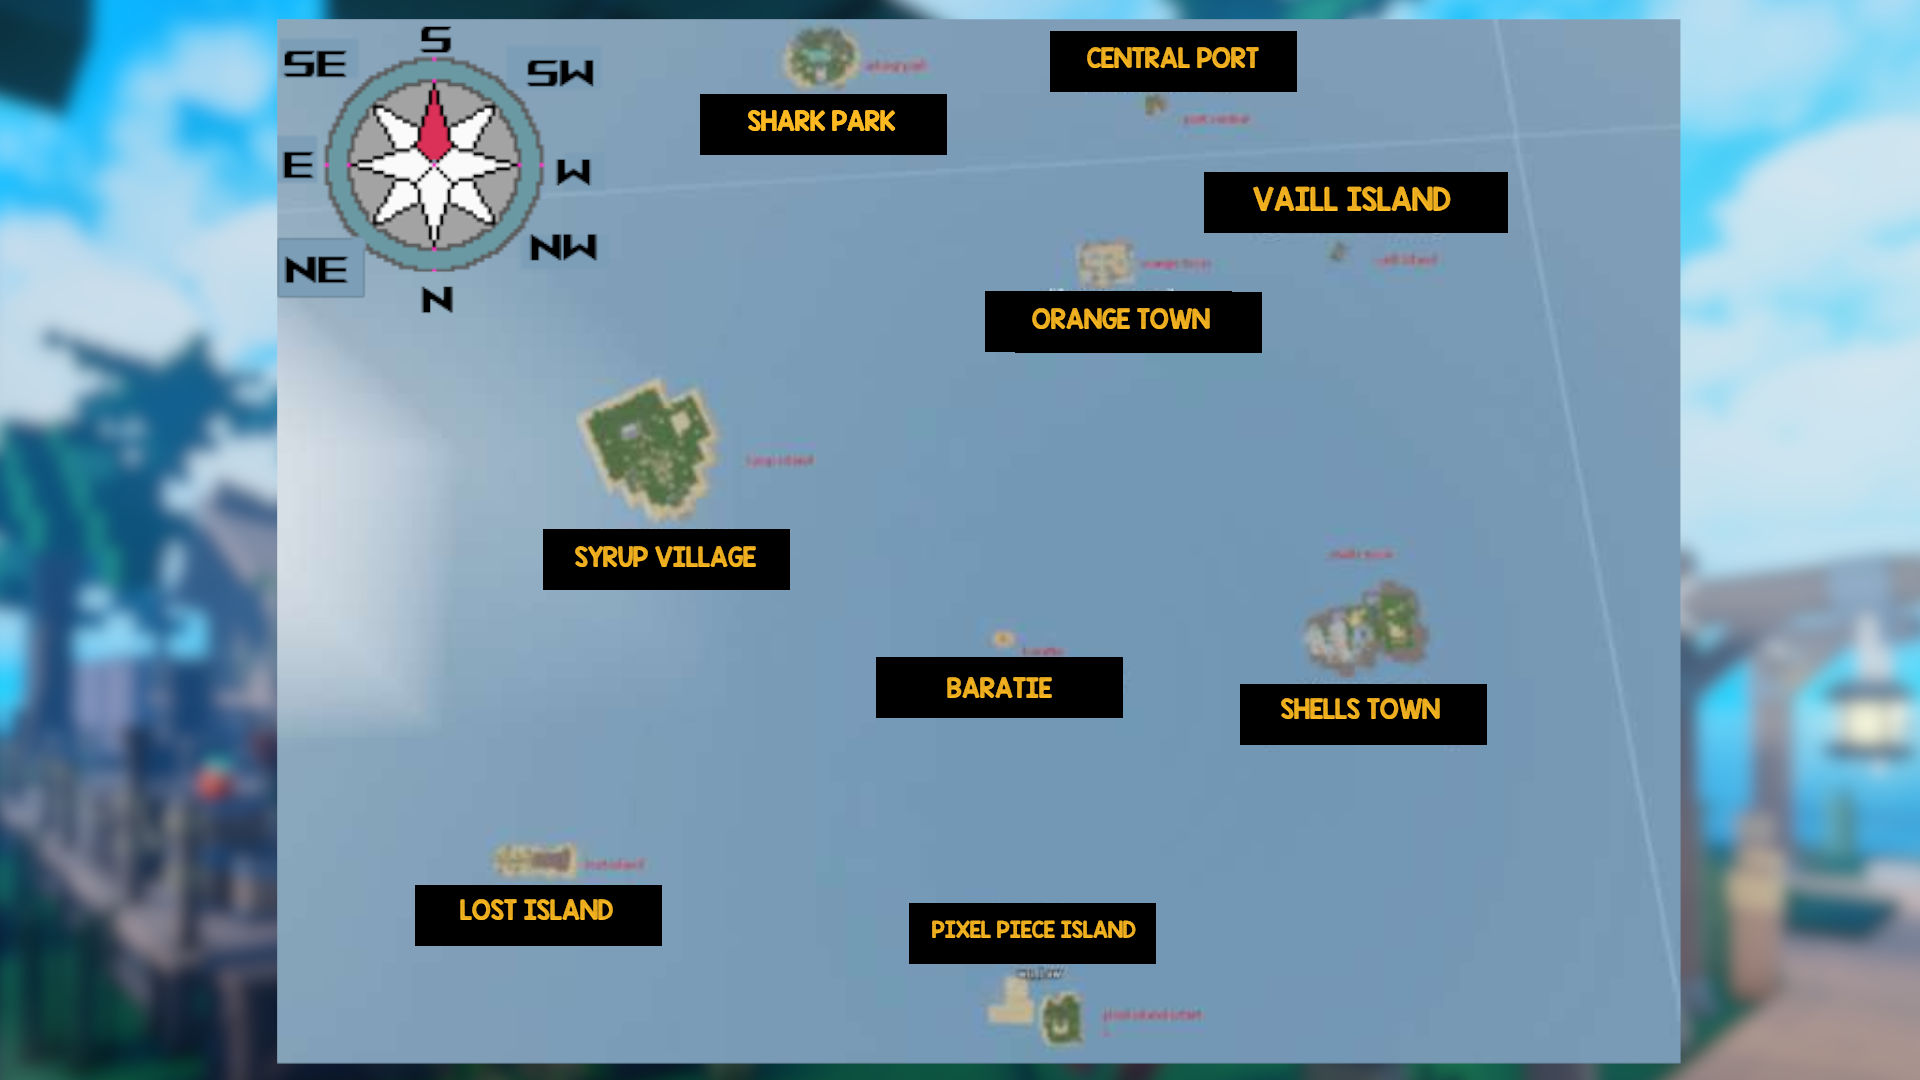 roblox king legacy map and levels 